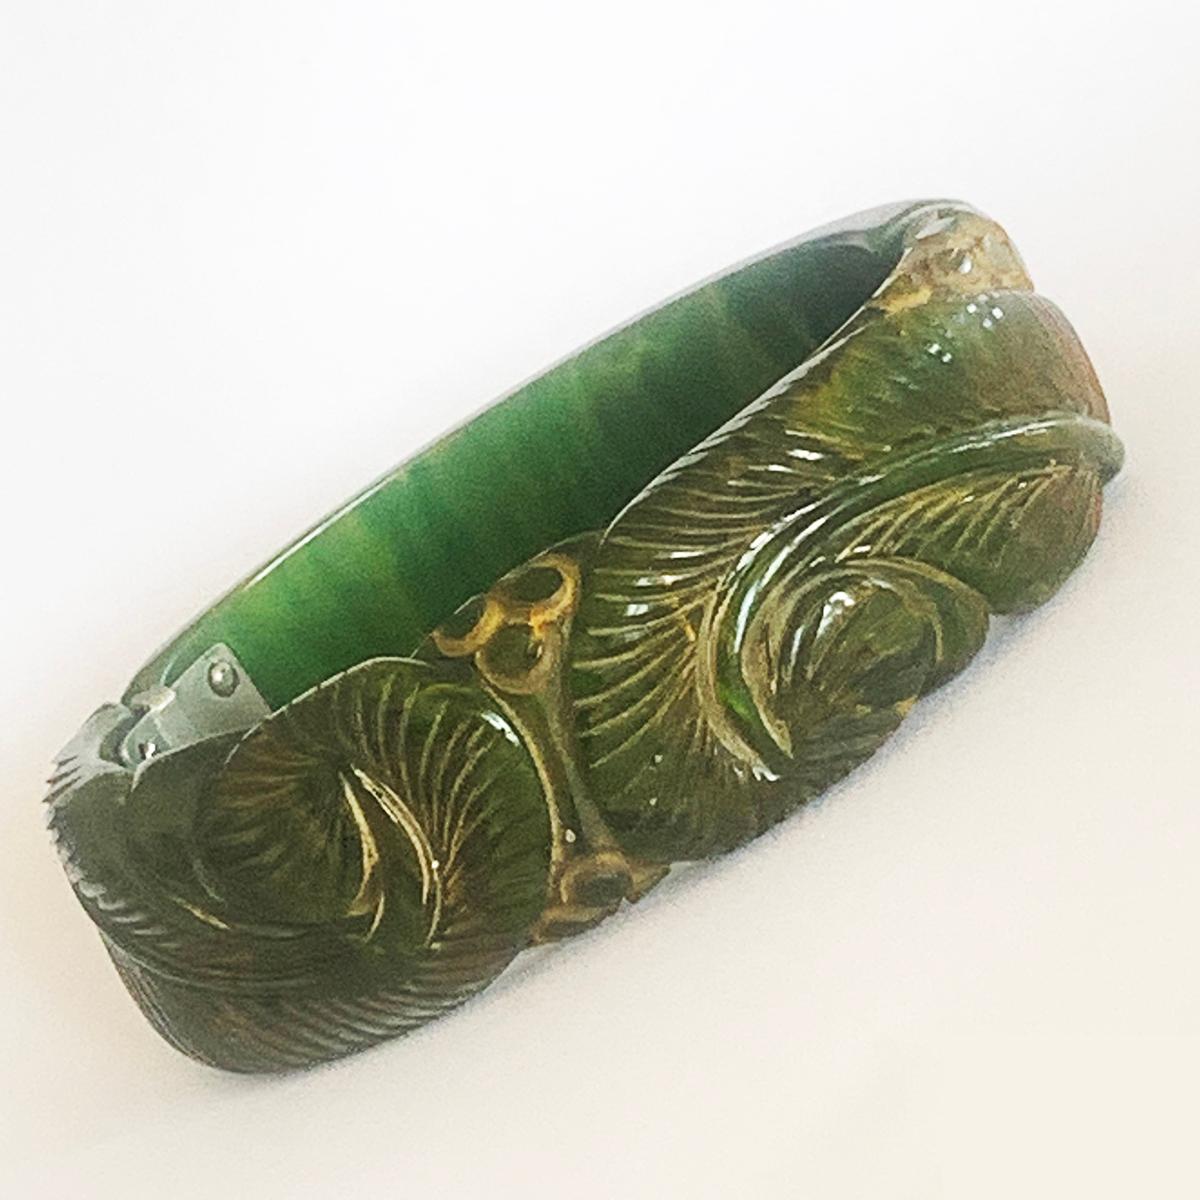 Art Deco Green Bakelite with fine yellow veins, Clamper Bangle, deeply Carved in form of Fern Fronds and Berries, and softly stained with a yellow/orange patina to the engraved details. All in excellent condition, including the springs and nickel